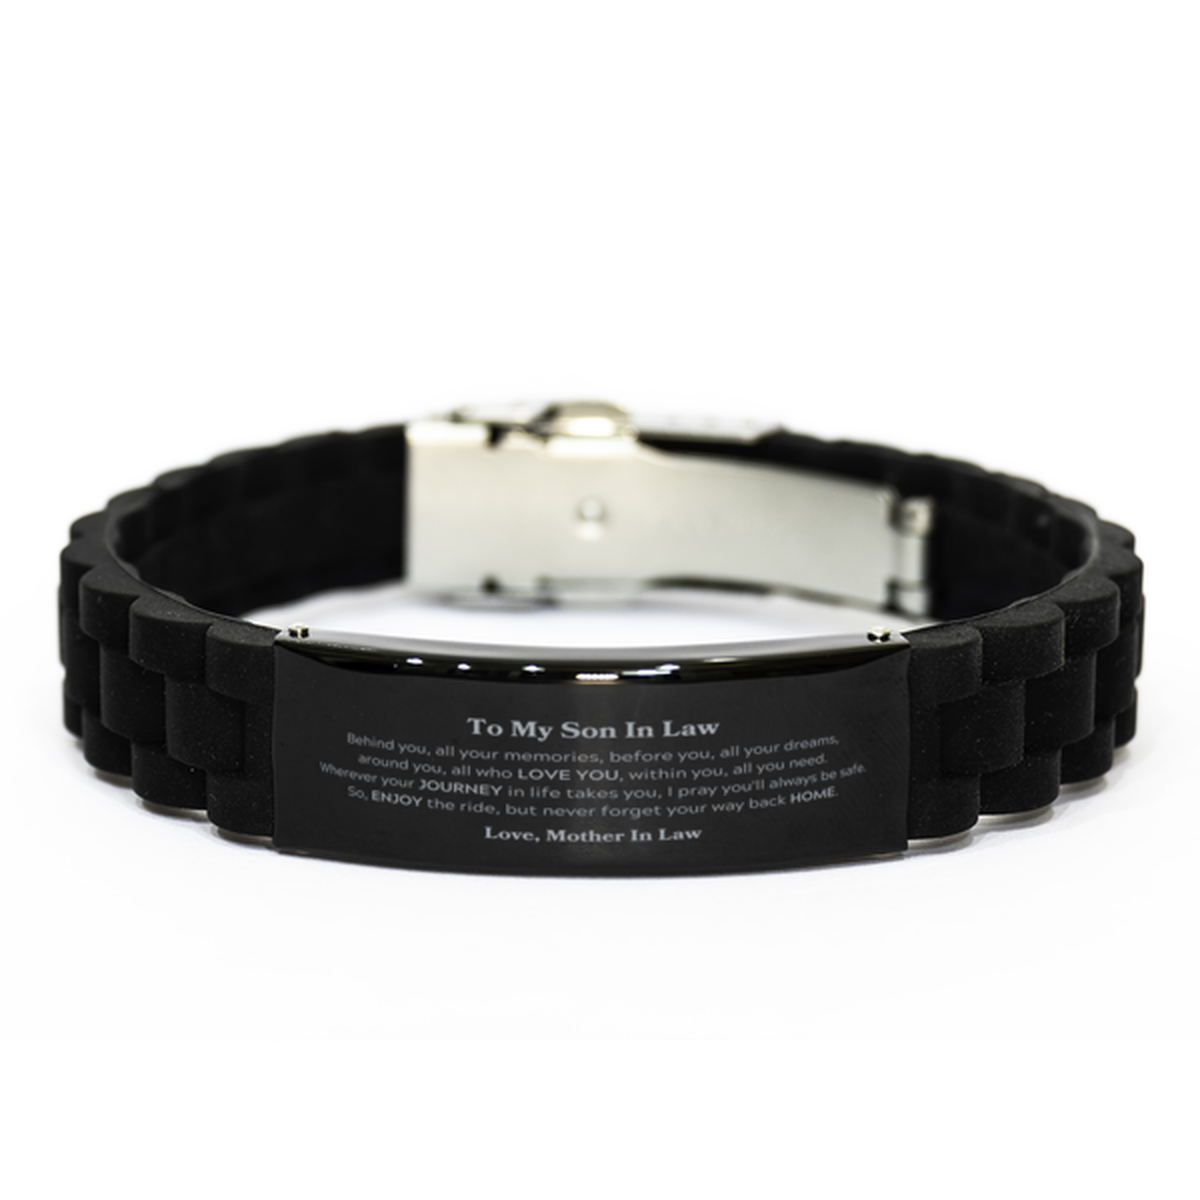 To My Son In Law Graduation Gifts from Mother In Law, Son In Law Black Glidelock Clasp Bracelet Christmas Birthday Gifts for Son In Law Behind you, all your memories, before you, all your dreams. Love, Mother In Law